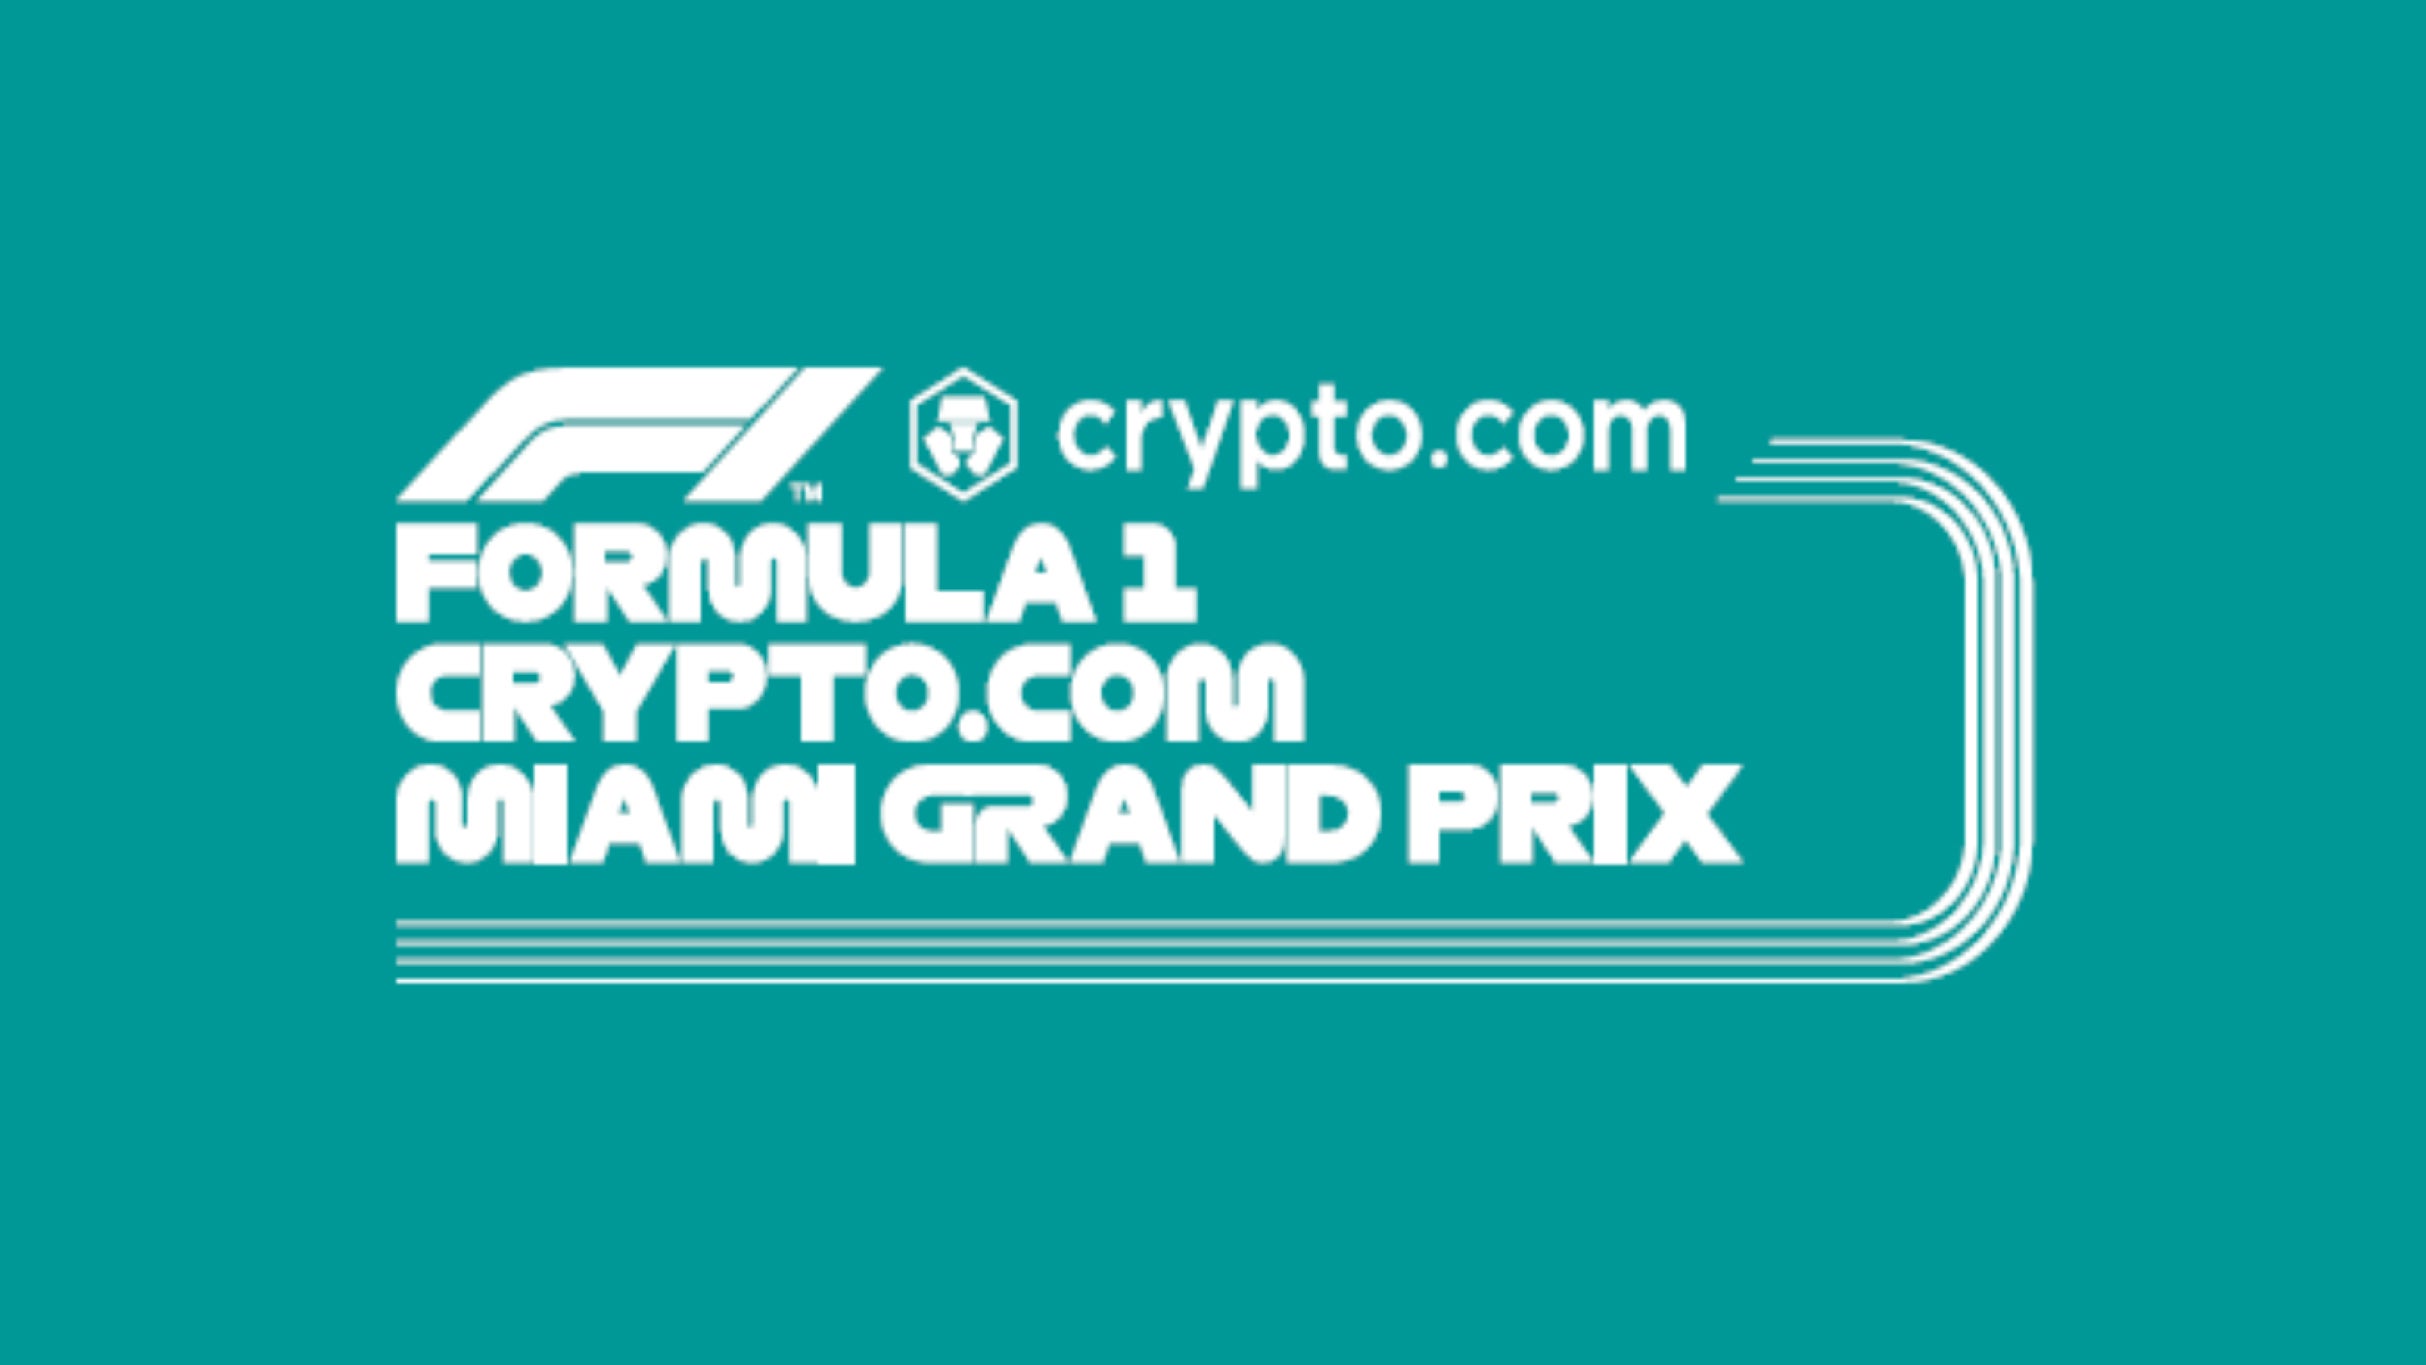 F1 confirms date for Miami Grand Prix - South Florida Business Journal